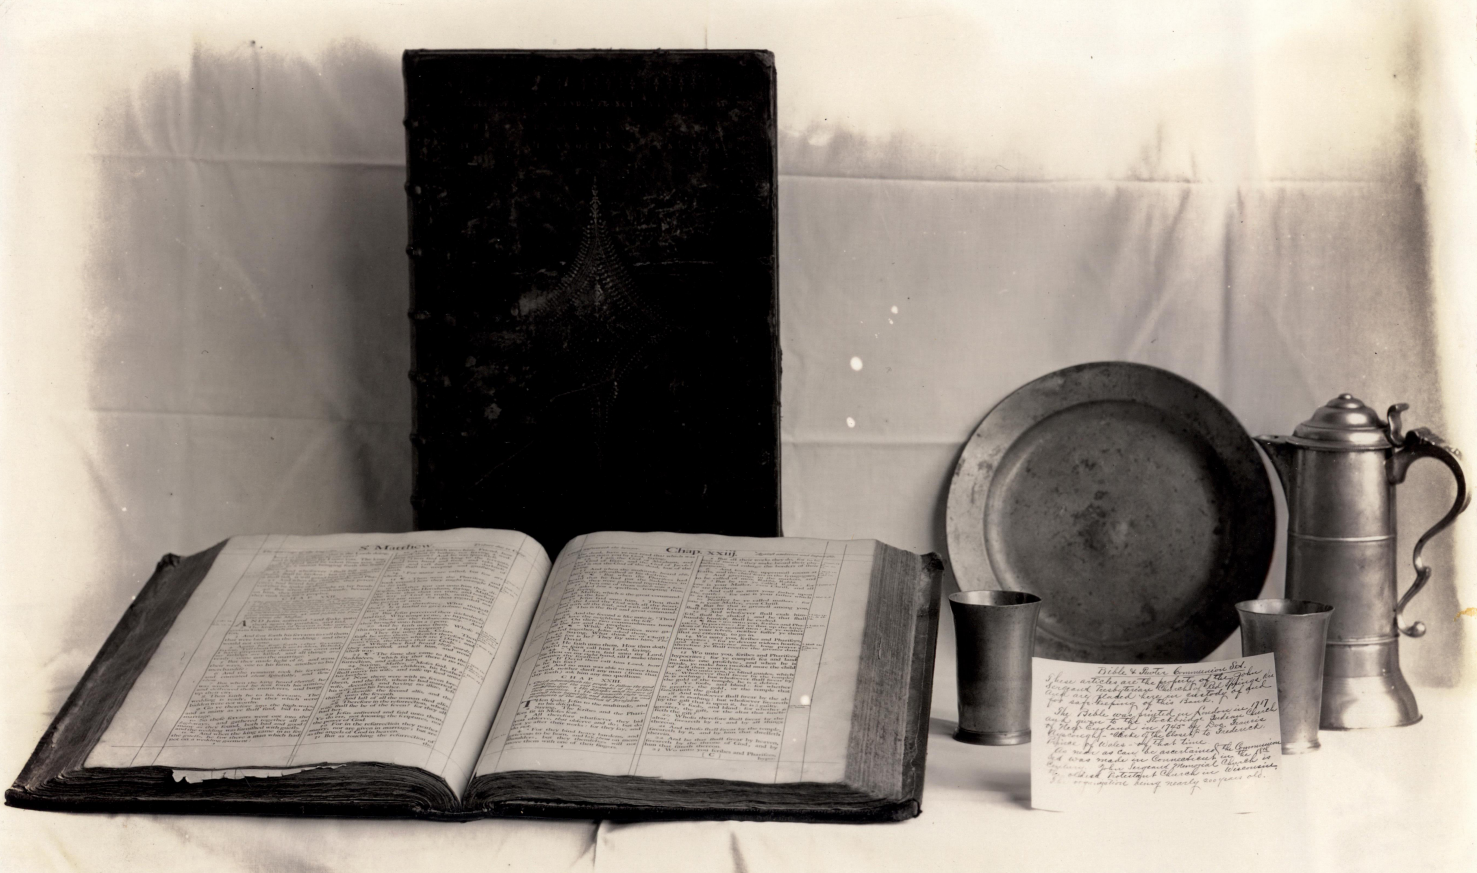 The two-volume Bible and four-piece pewter Communion set. Photograph courtesy of the Arvid E. Miller Library-Museum.